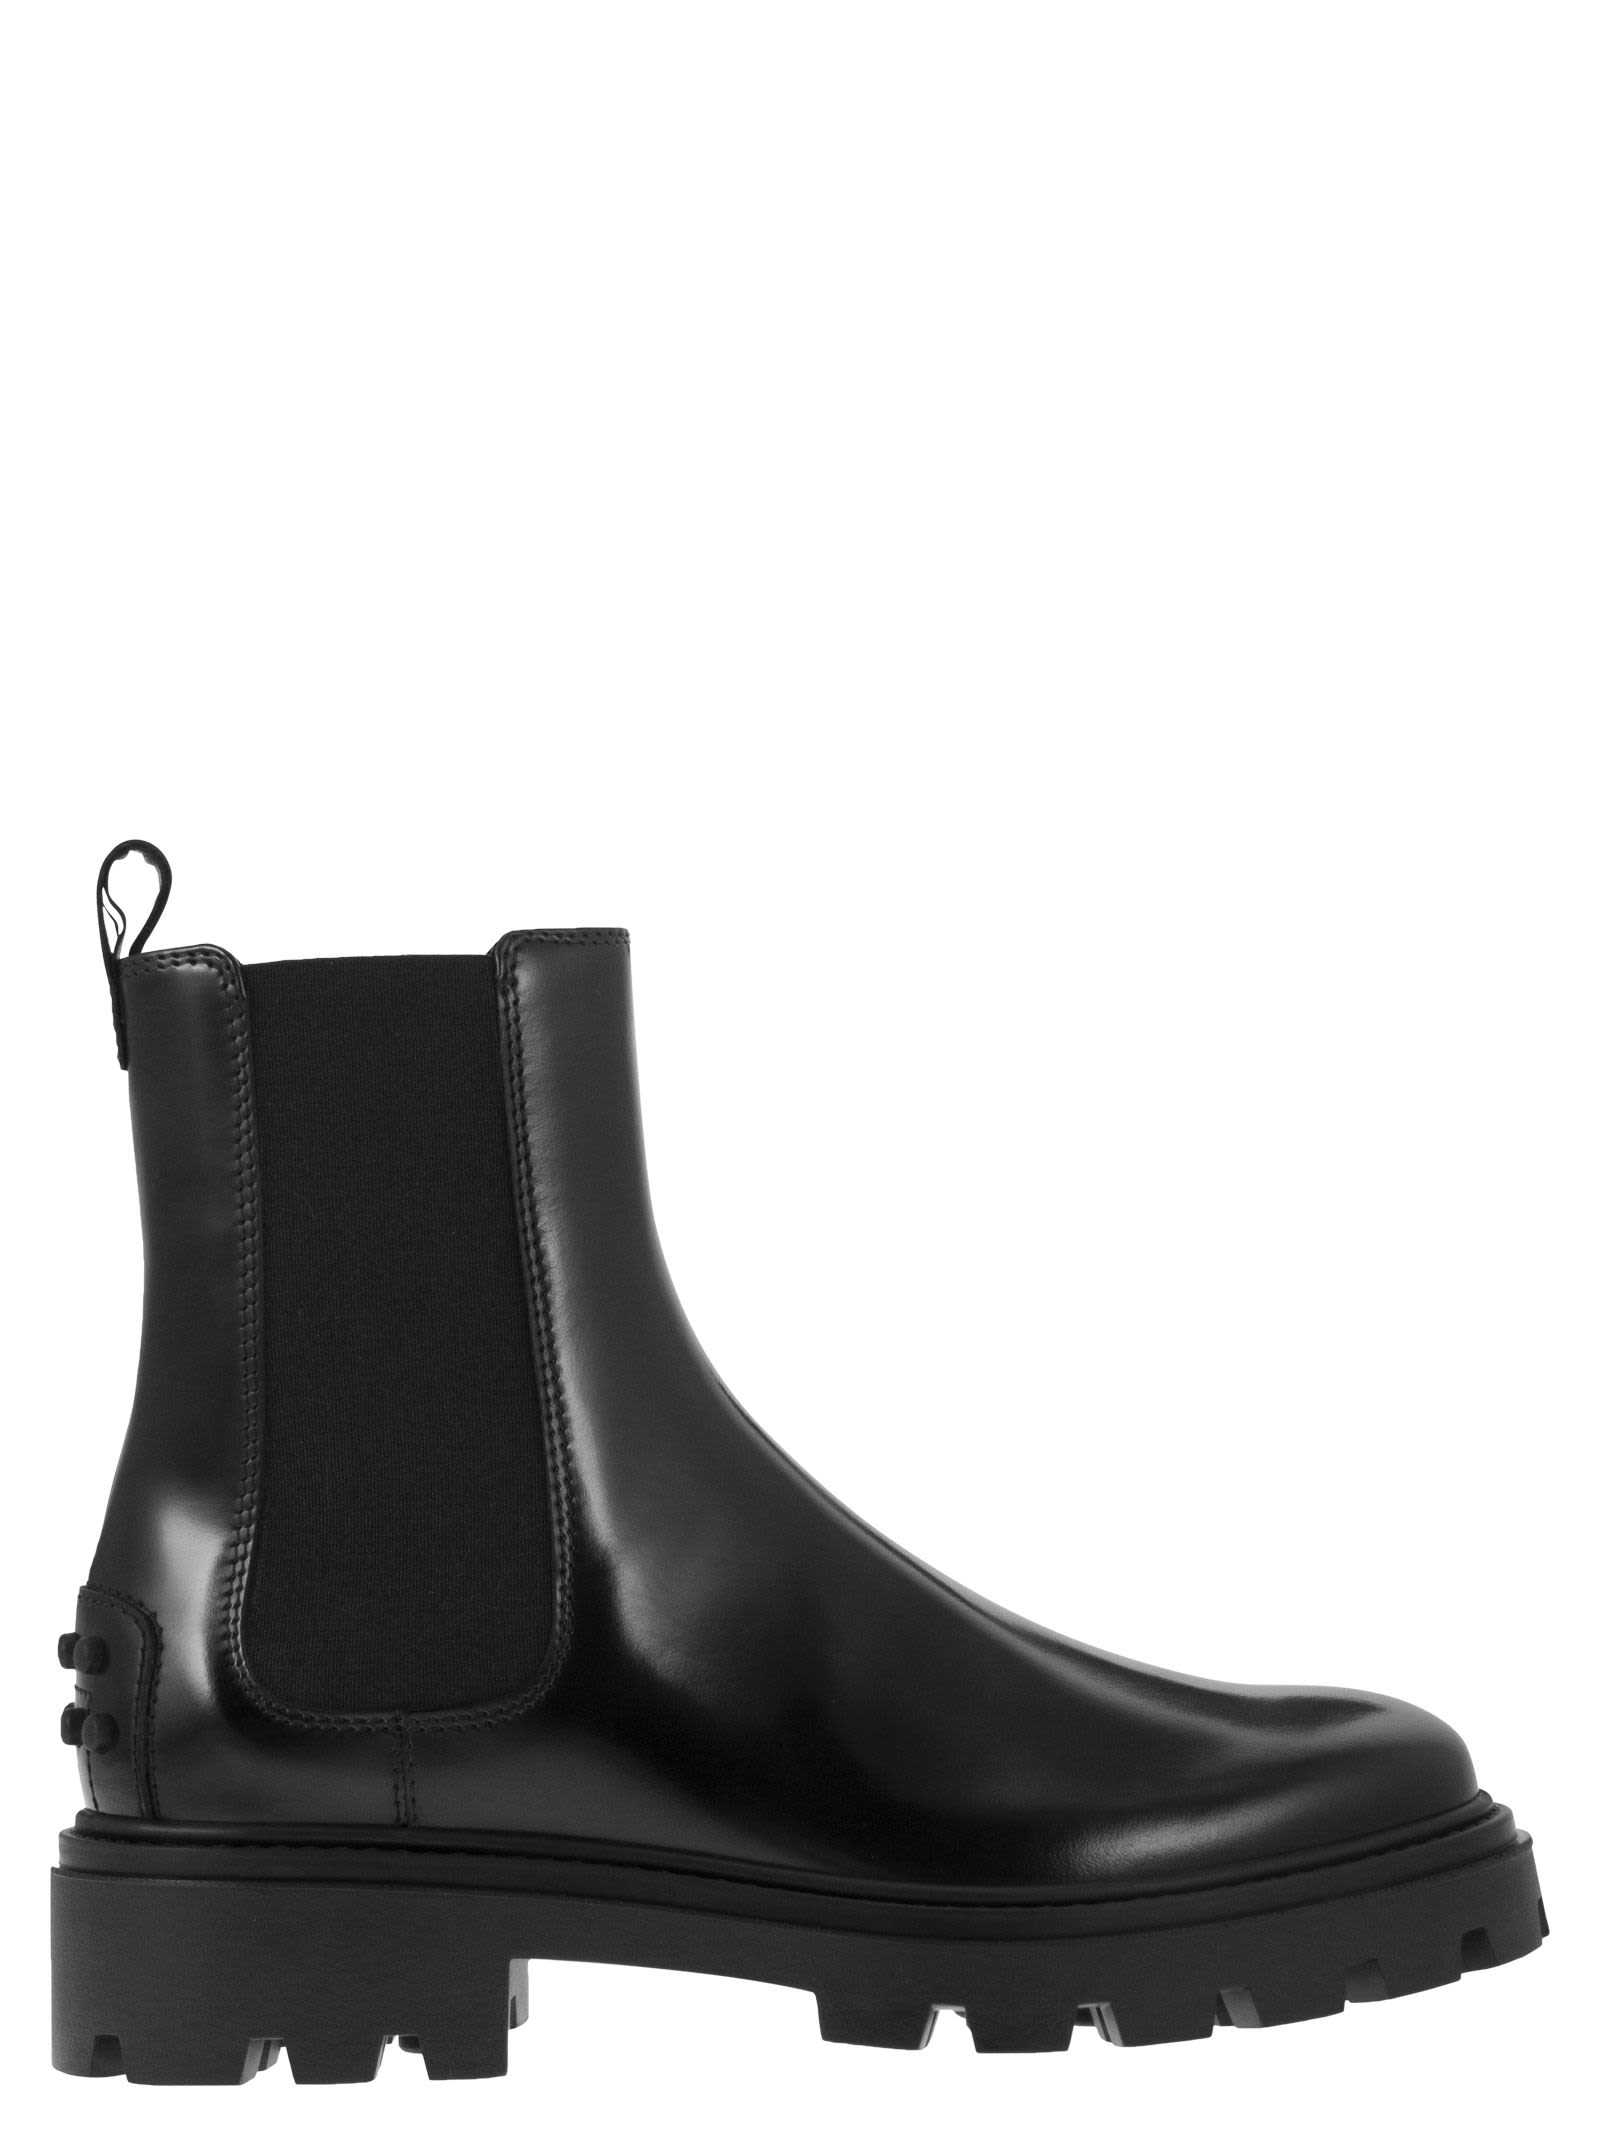 TOD'S BLACK BEATLES BOOTIE WITH STRETCH INSERTS AND RUBBER DETAIL IN LEATHER WOMAN